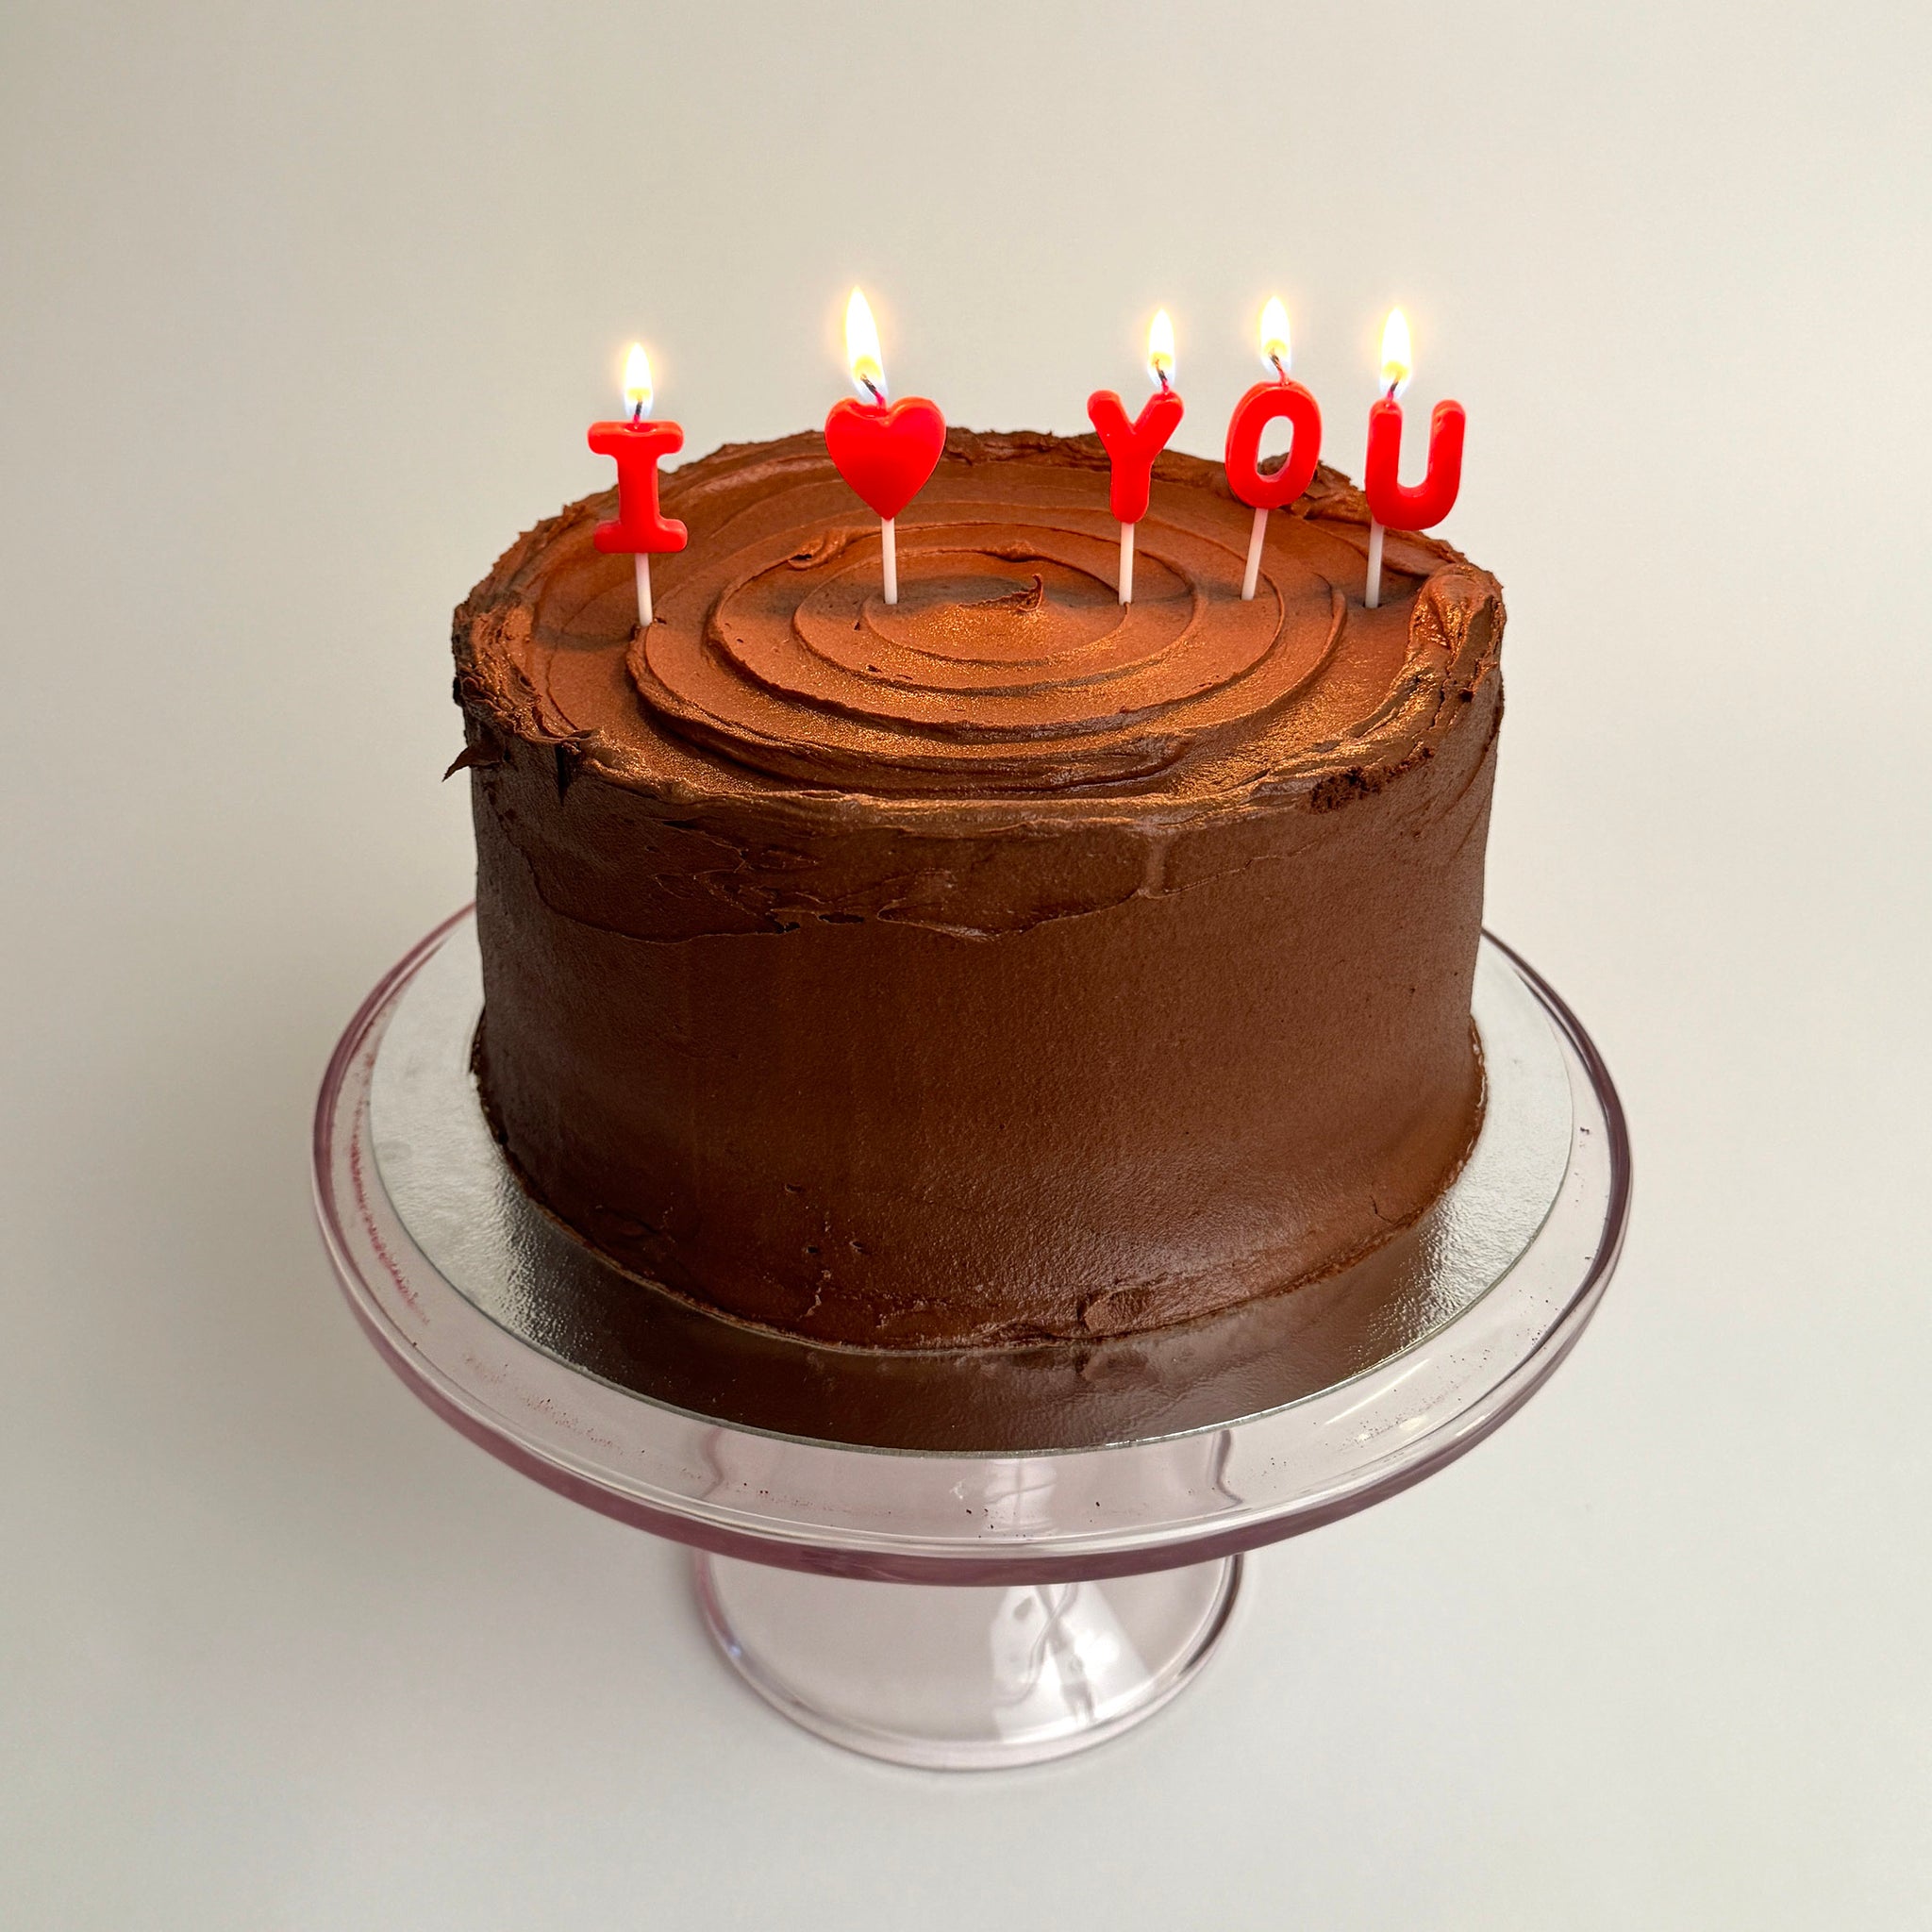 Chocolate Fudge Double Layer Cake, with Chocolate Buttercream